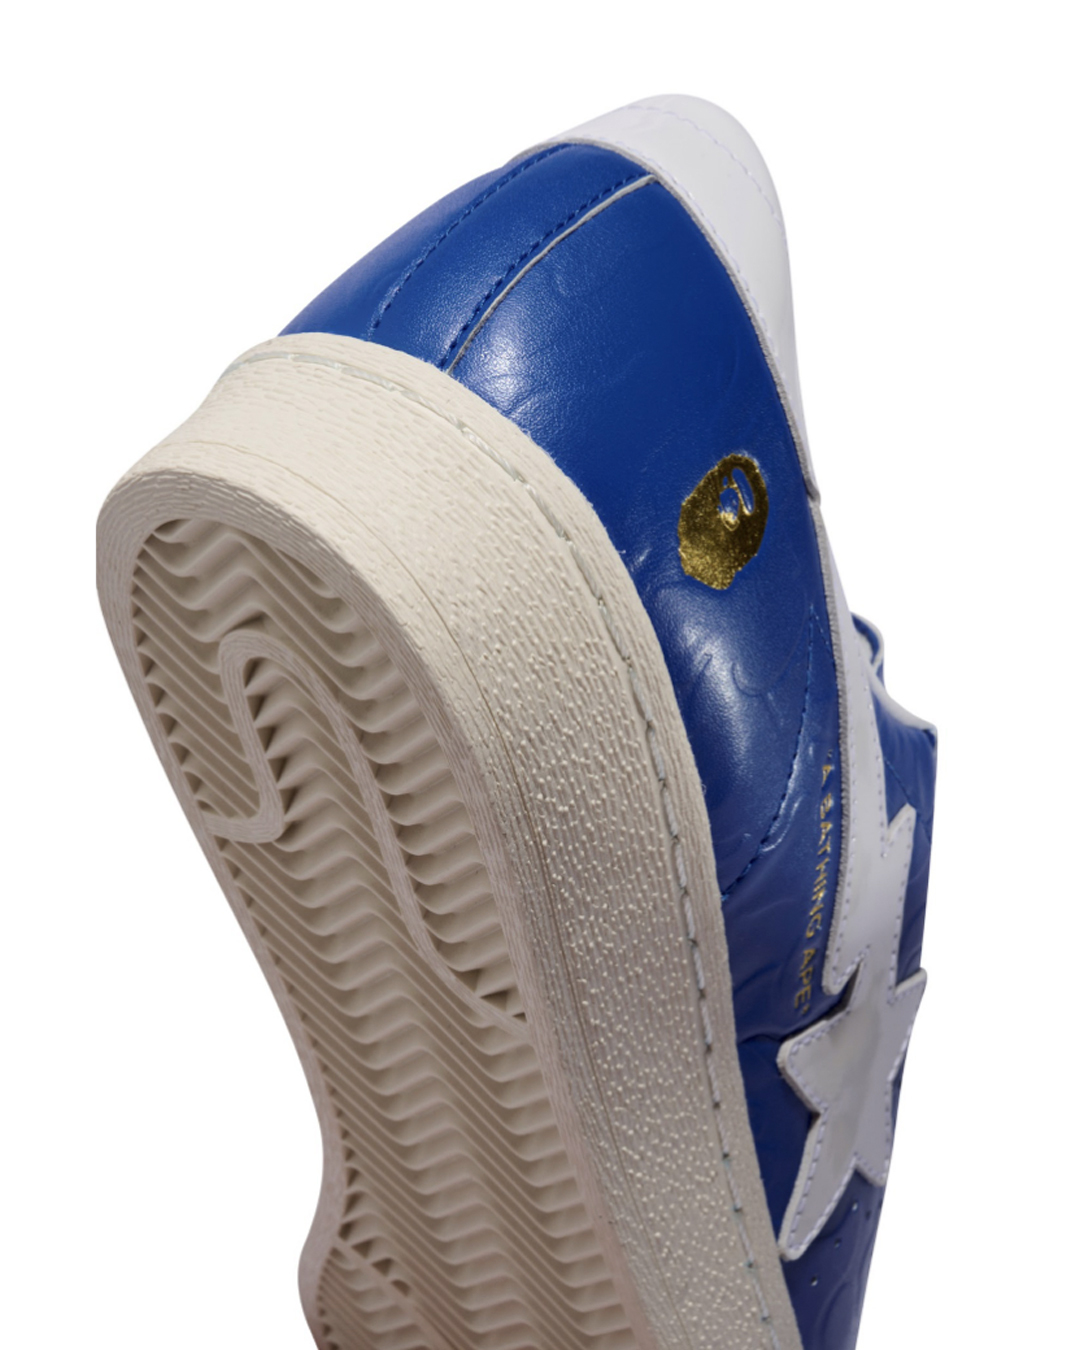 Close-up of a blue and white sneaker with a textured sole, showcasing the sneaker&#x27;s design details